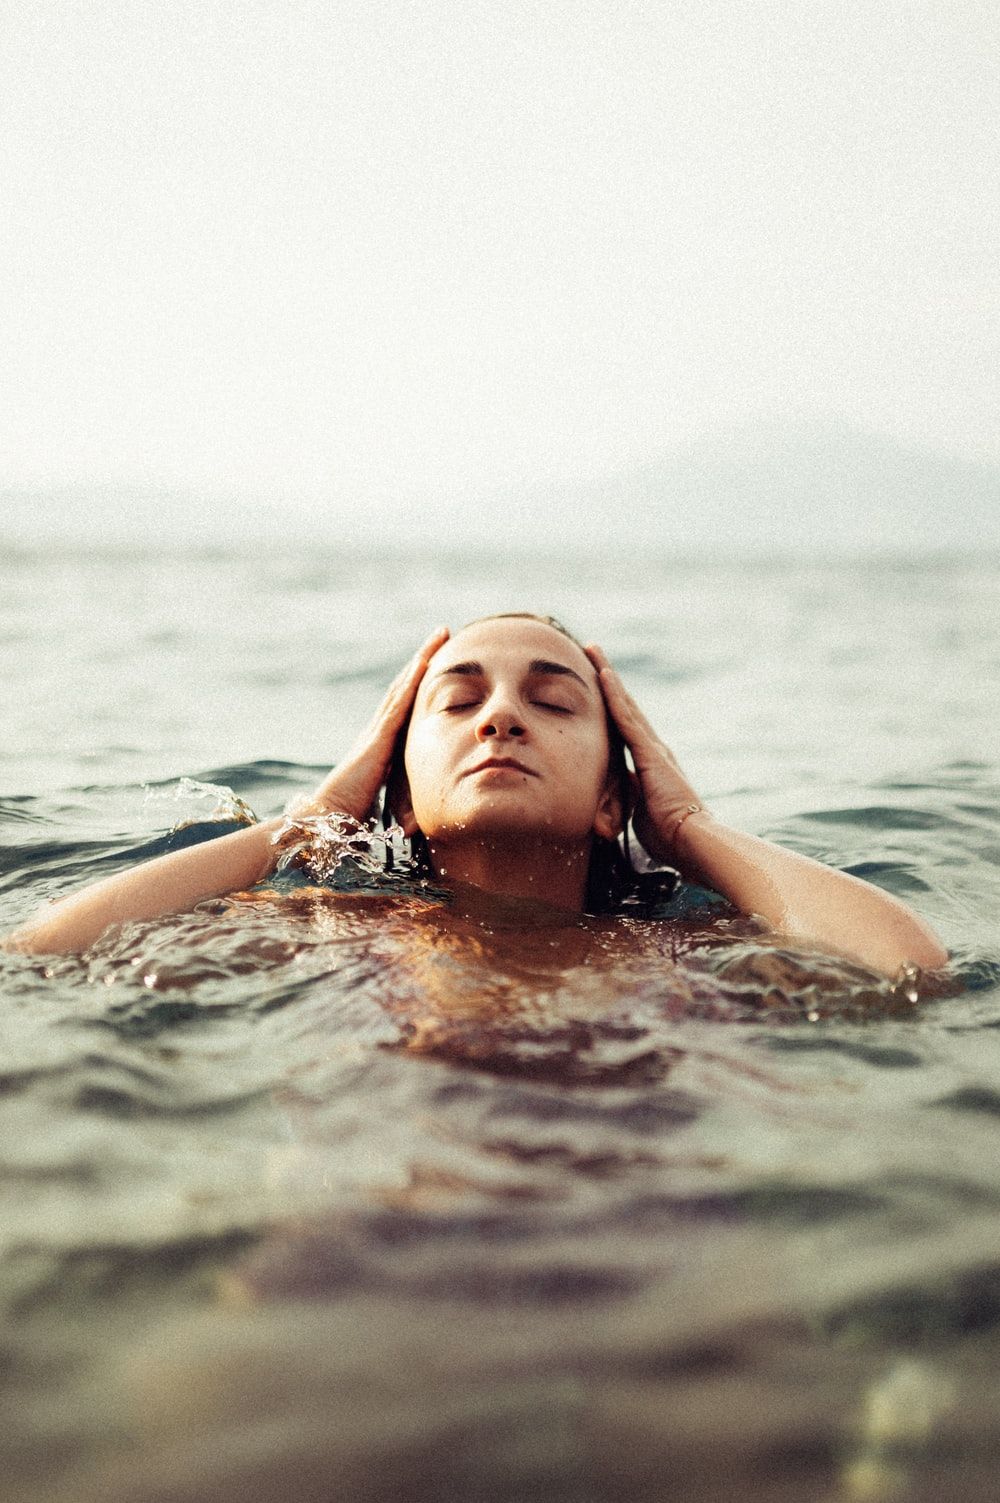 Woman In Water Picture. Download Free Image